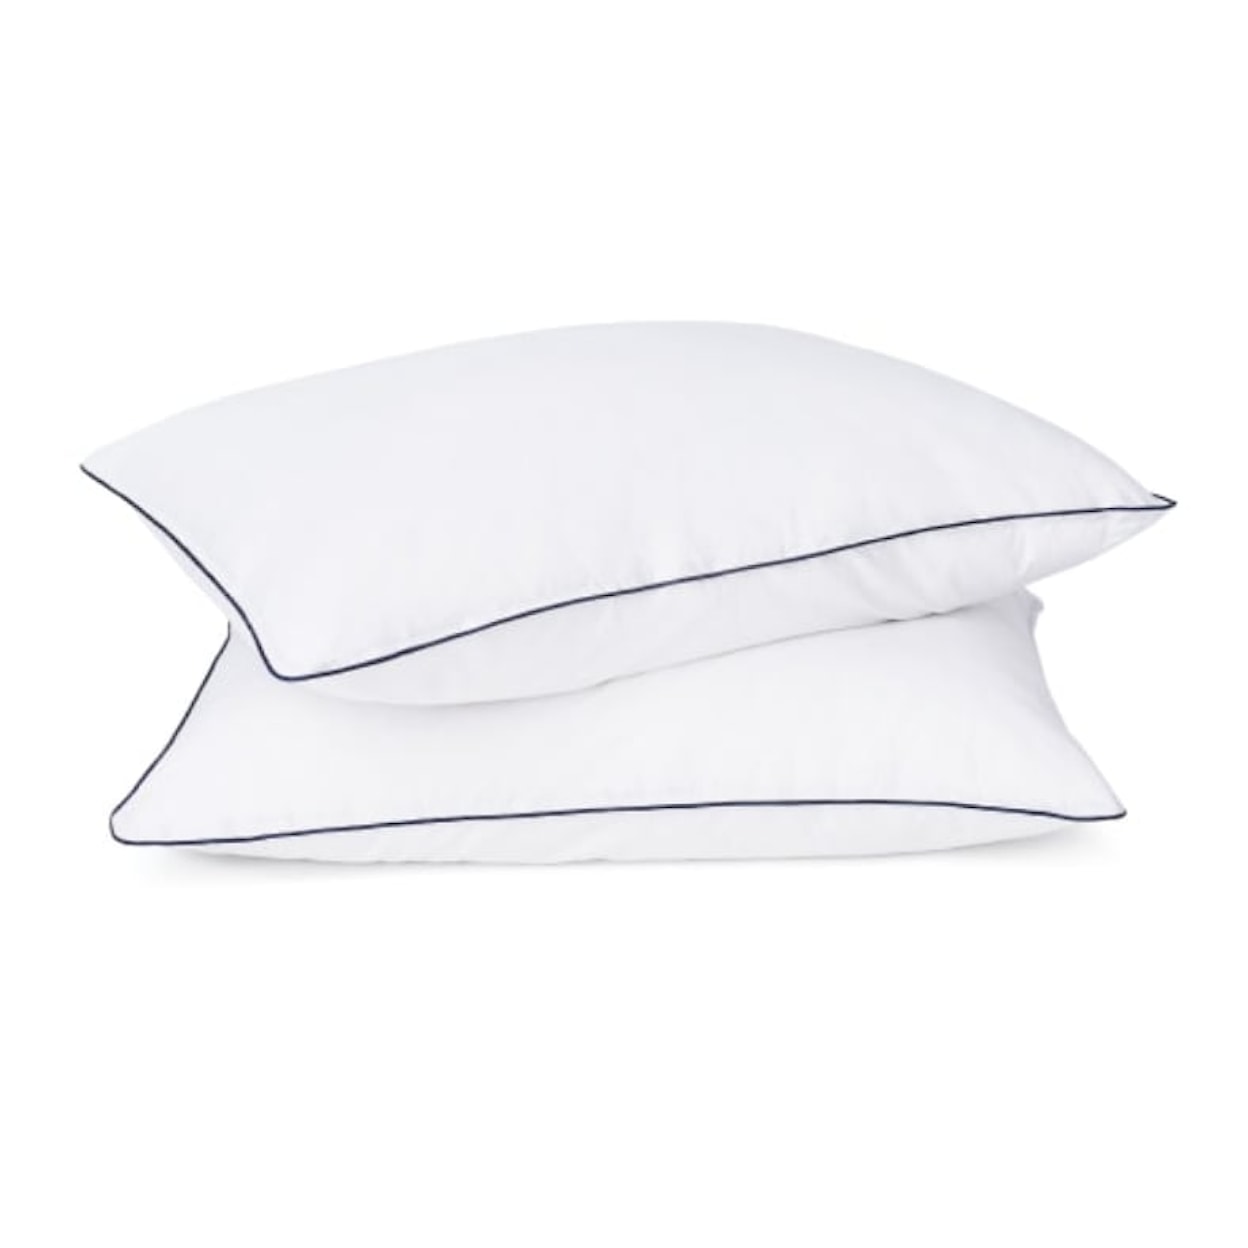 Helix Sunset Luxe Sunset Luxe Twin + FREE Pillow